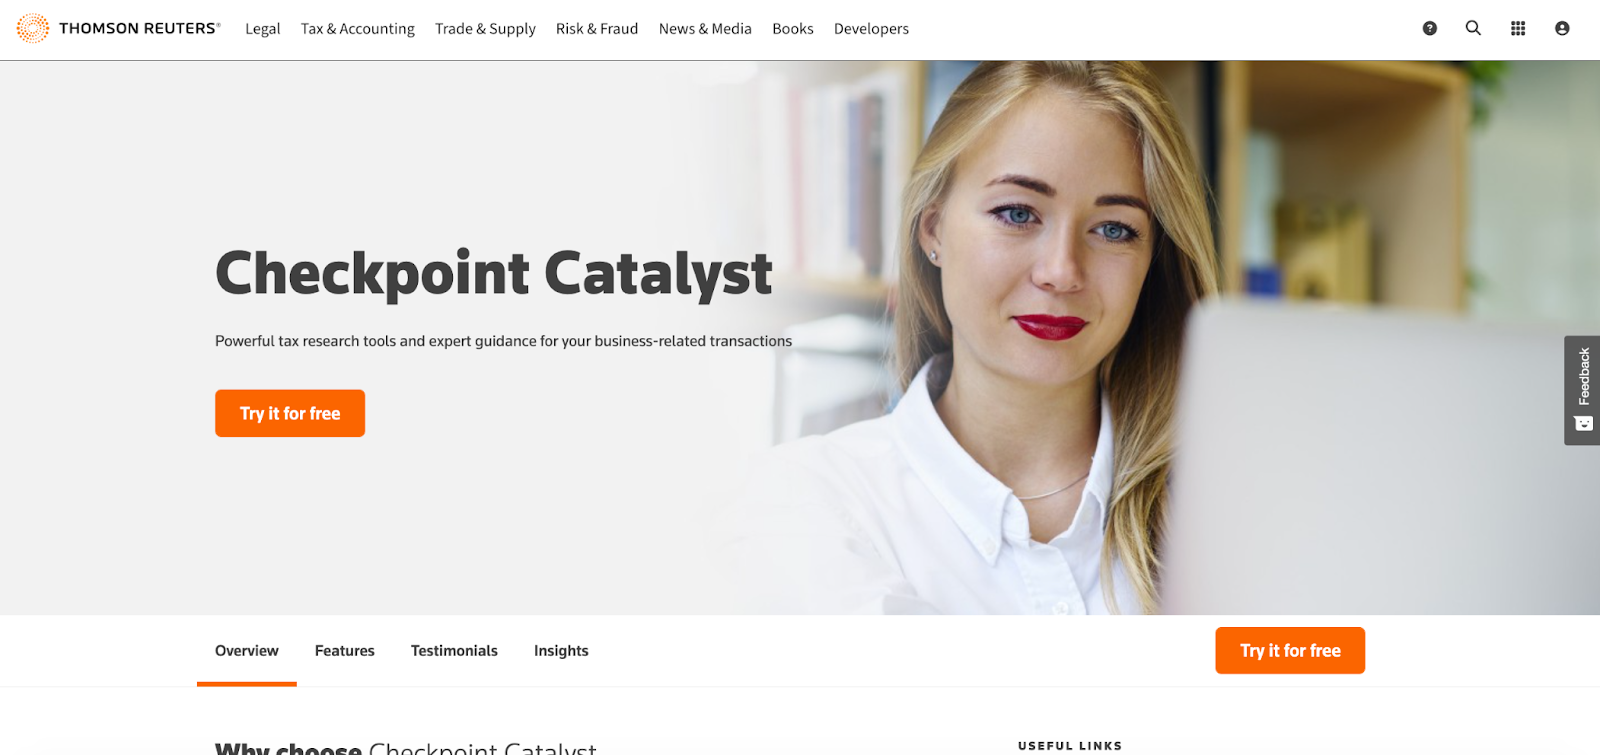 client accounting services system - checkpoint catalyst tax research tool